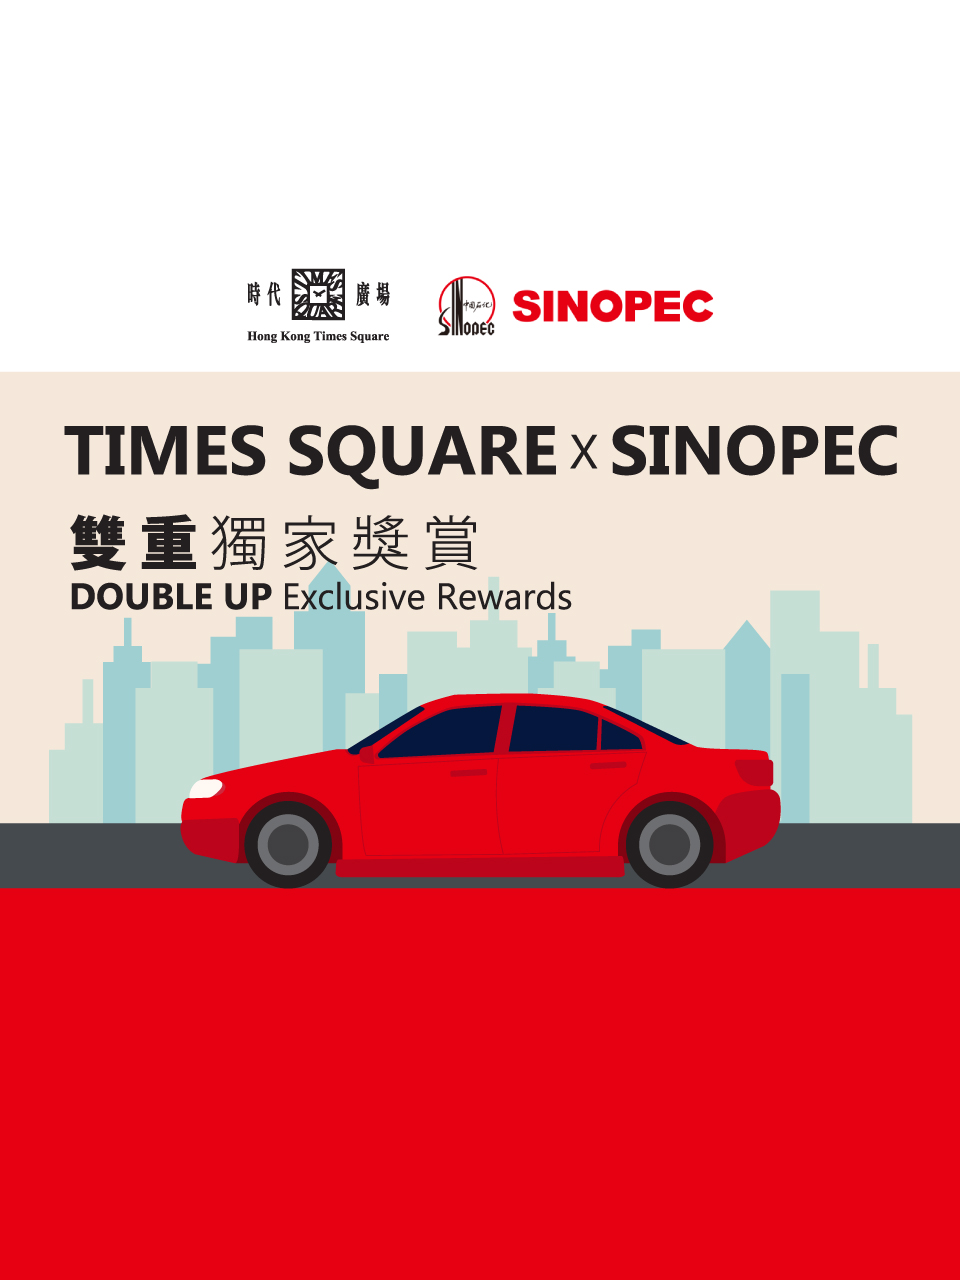 Times Square x SINOPEC DOUBLE UP Exclusive Rewards